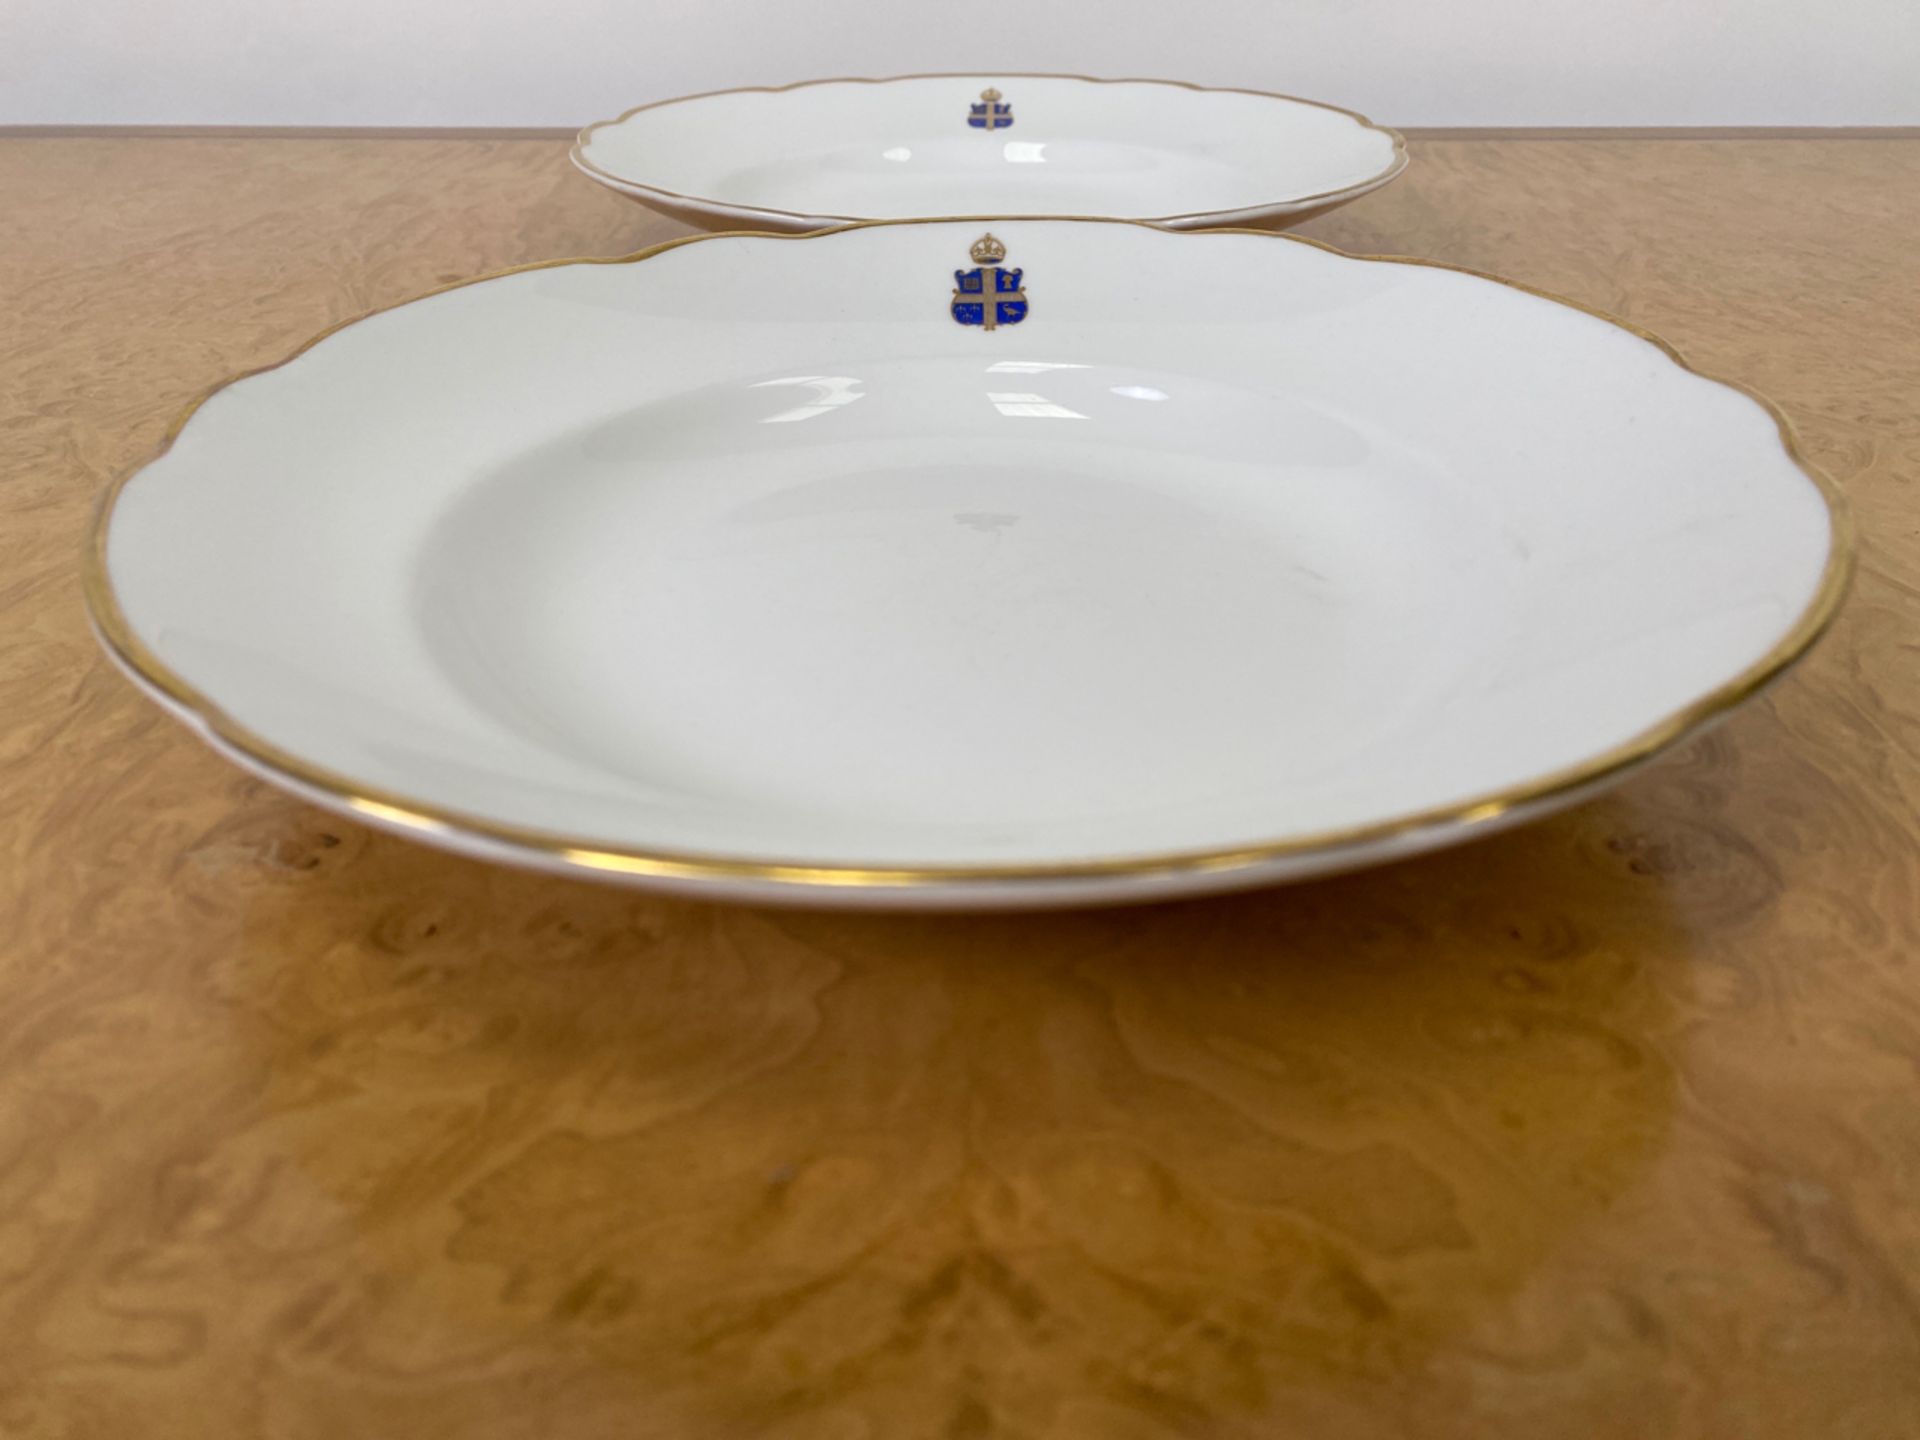 Set of Crested Crockery for Claridge's by Chommette 1884 - Image 27 of 31